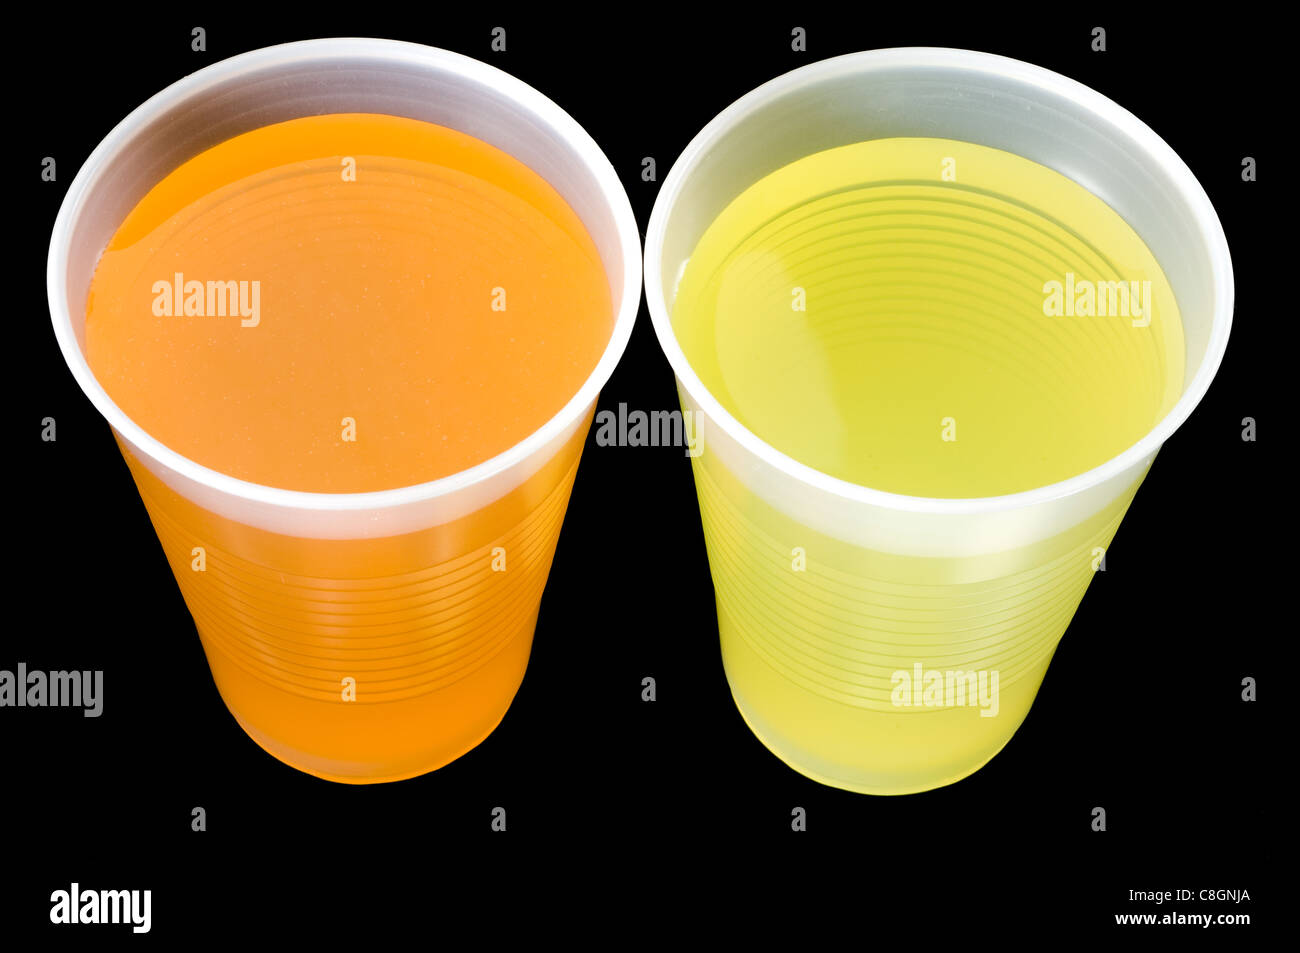 Two plastic cups with yellow and orange liquid. Stock Photo